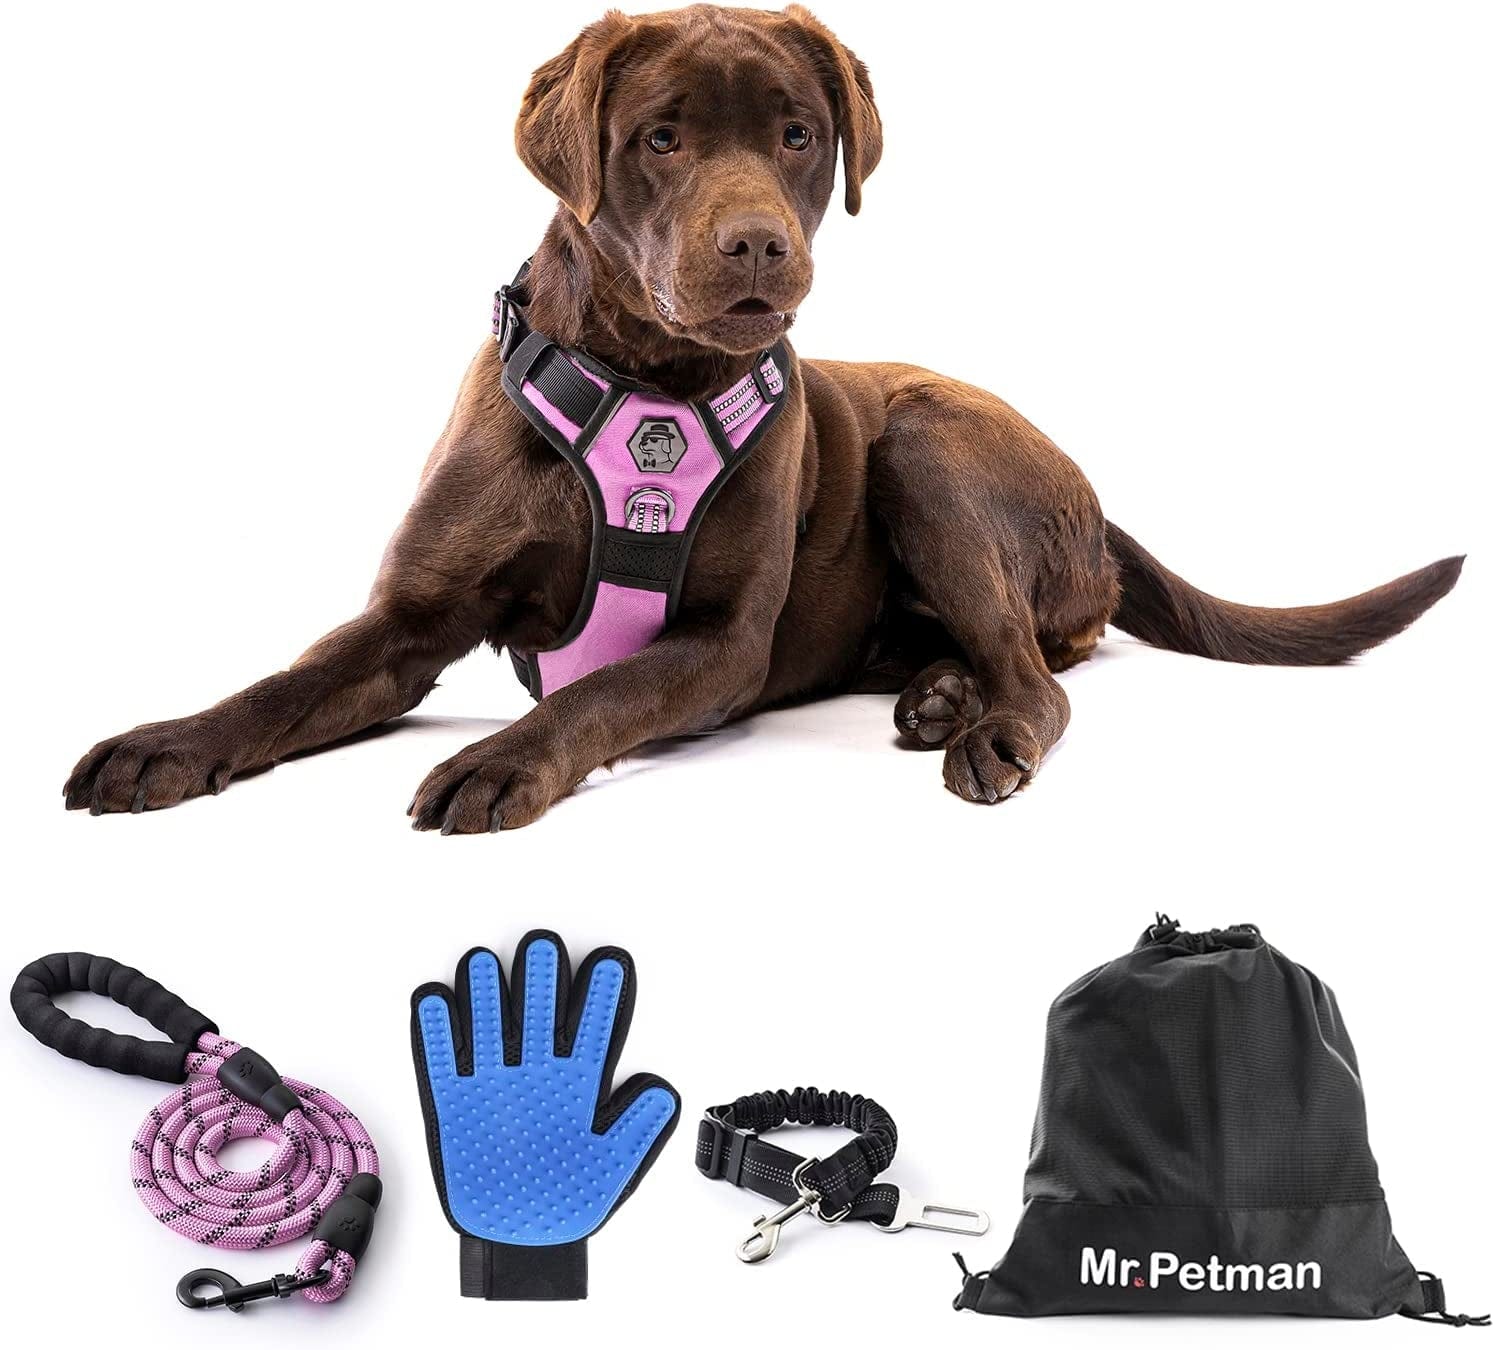 MR. PETMAN No Pull Dog Harness with Leash, Seat Belt, Grooming Glove - No Choke Dog Harness Set for Small Medium Large Dogs- Reflective Adjustable Dog Vest Harnesses with Handle for Walking Training Animals & Pet Supplies > Pet Supplies > Dog Supplies > Dog Apparel Mr. Petman Baby Pink Large 